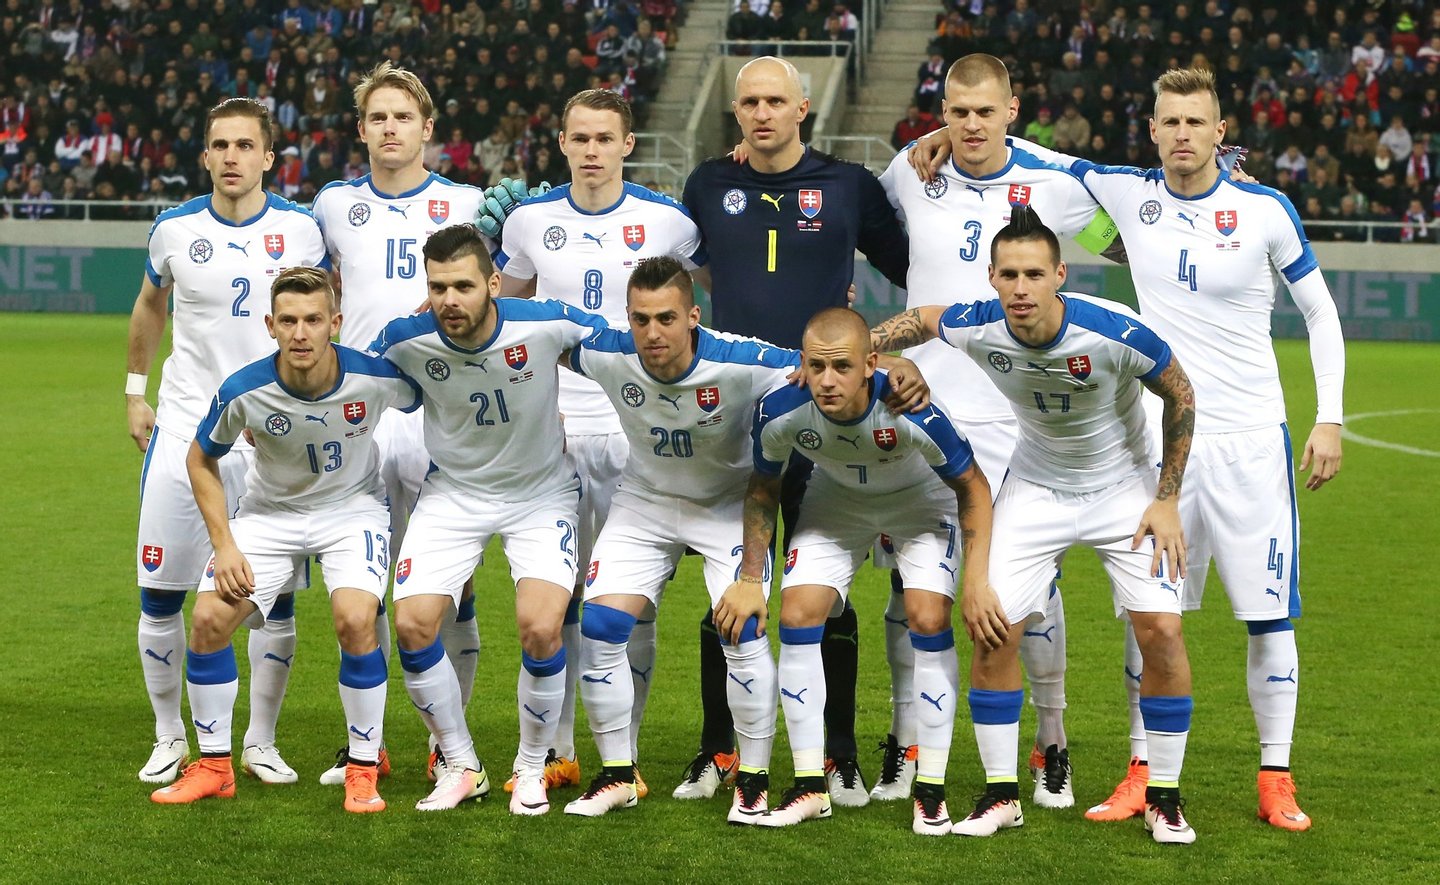 TRNAVA, SLOVAKIA - MARCH 25: The Slovakia team pose for a team photo during the international friendly match between Slovakia and Latvia held at Stadion Antona Malatinskeho on March 25, 2016 in Trnava, Slovakia. (Photo by David Rogers/Getty Images)